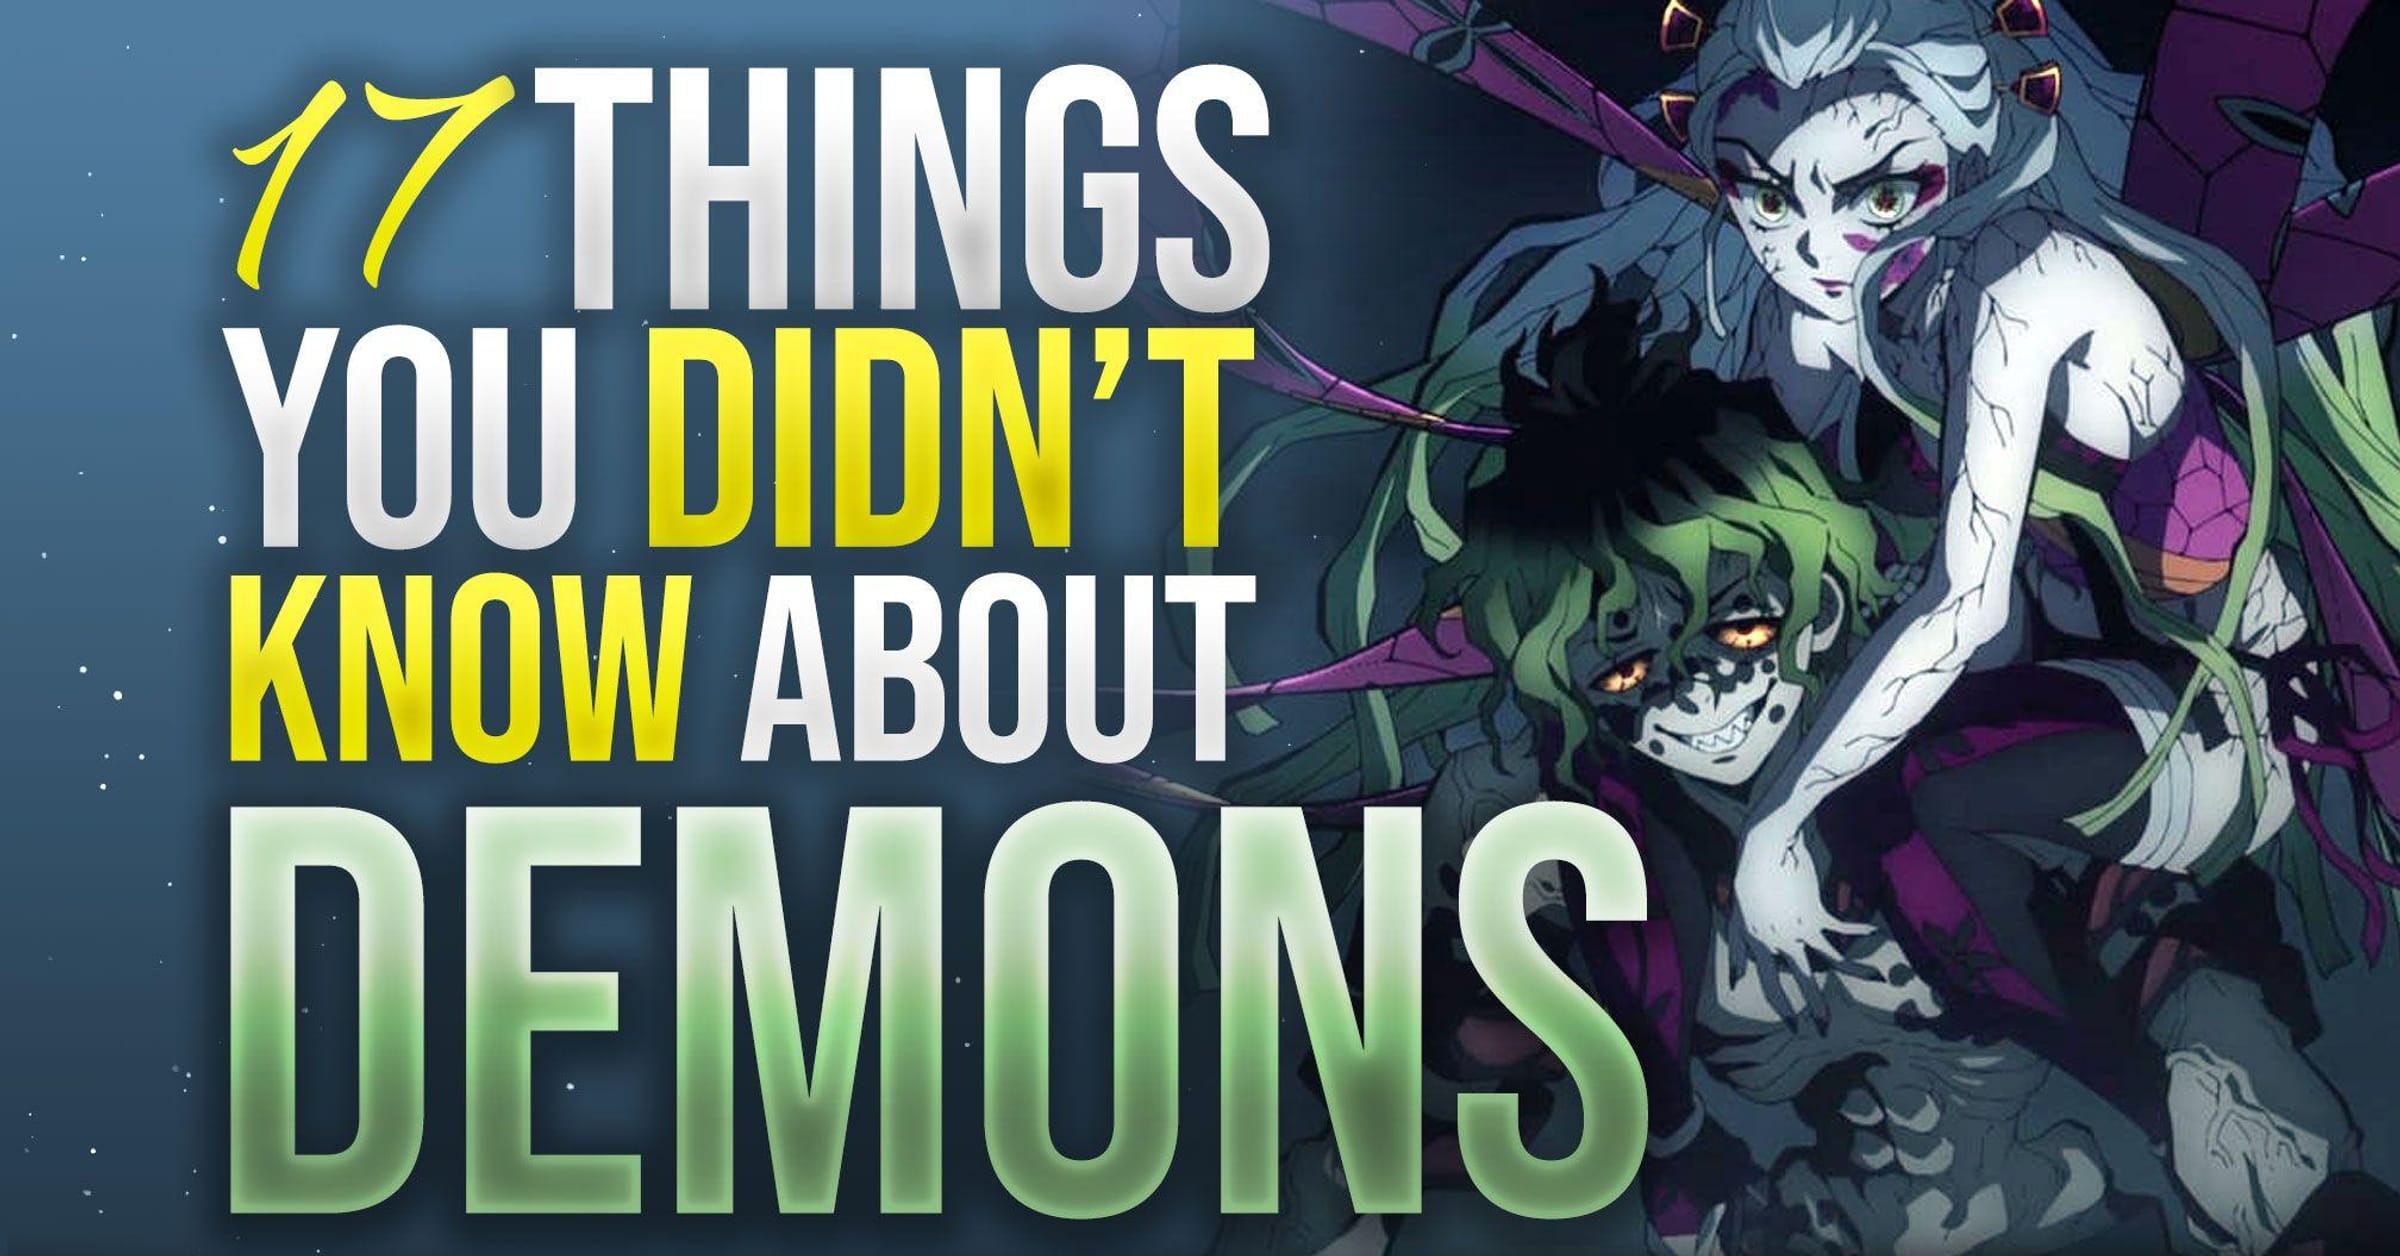 17 Things You Didn't Know About Demons From 'Demon Slayer